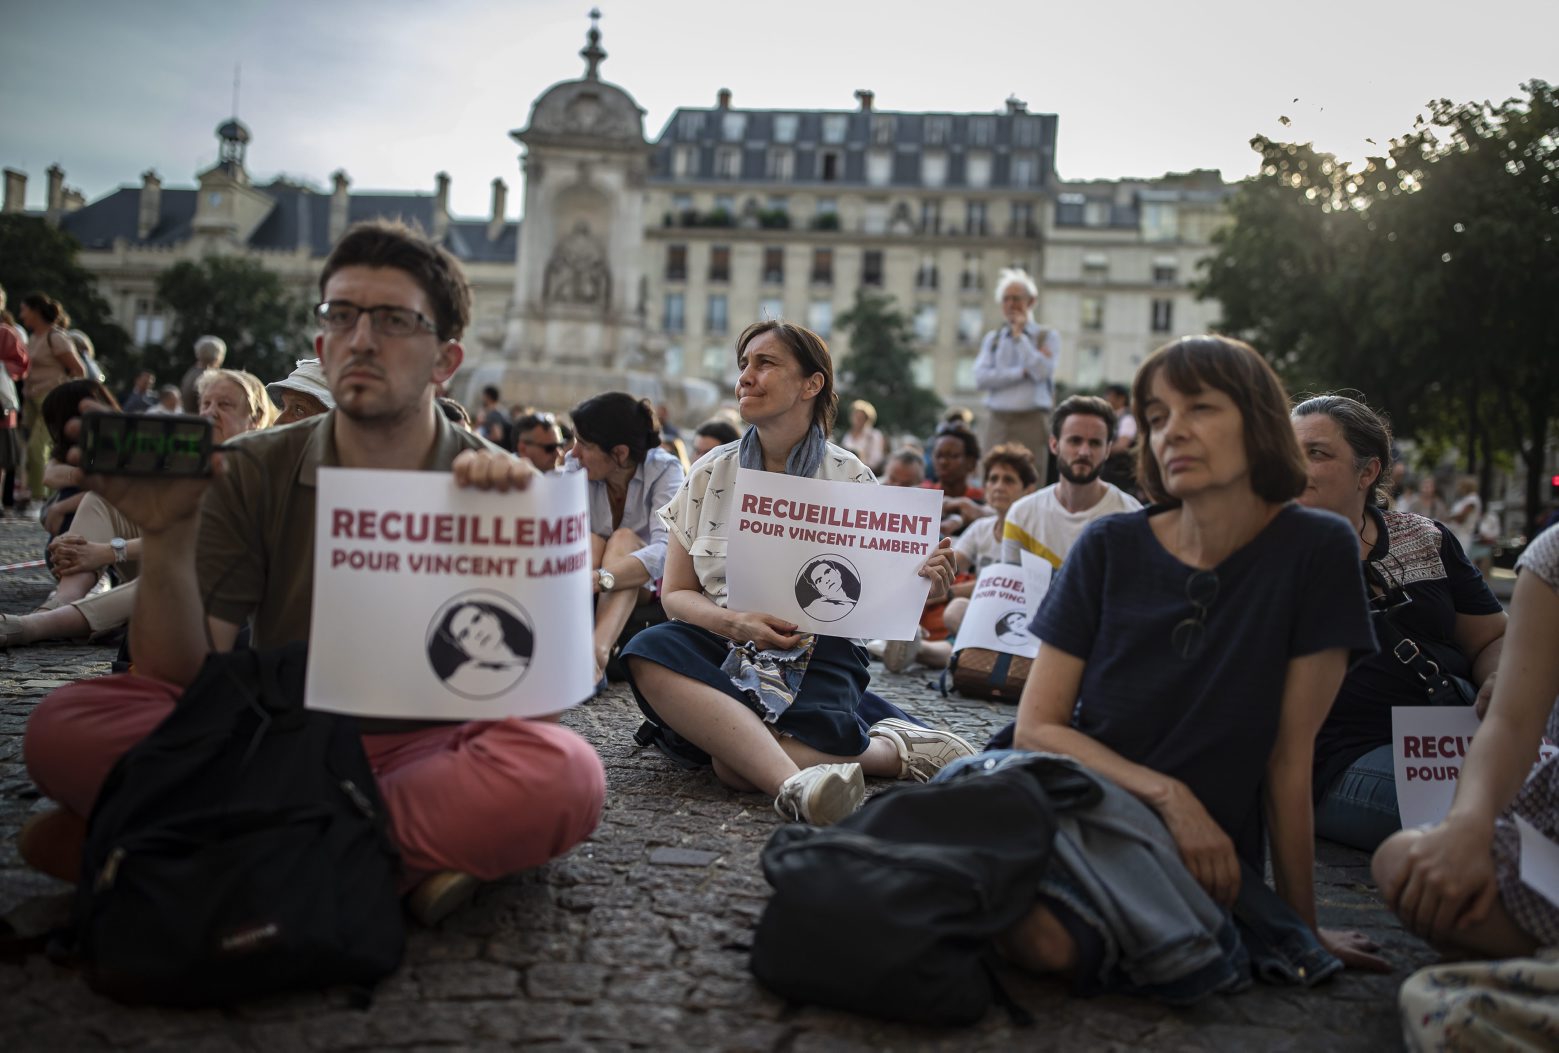 epa07708884 Christians gather for a vigil and prayer in support of Vincent Lambert, who has been in a vegetative state since 2008, on Place Saint Sulplice in Paris, France, 10 July 2019. Following a long-running legal battle, doctors have halted nutrition and hydration of Vincent Lambert, in line with wishes of his wife to end life support against his parents wishes. Lambert was left in a vegetative state by a motorcycle accident in 2008.  EPA/IAN LANGSDON FRANCE PARIS VINCENT LAMBERT PRAYER